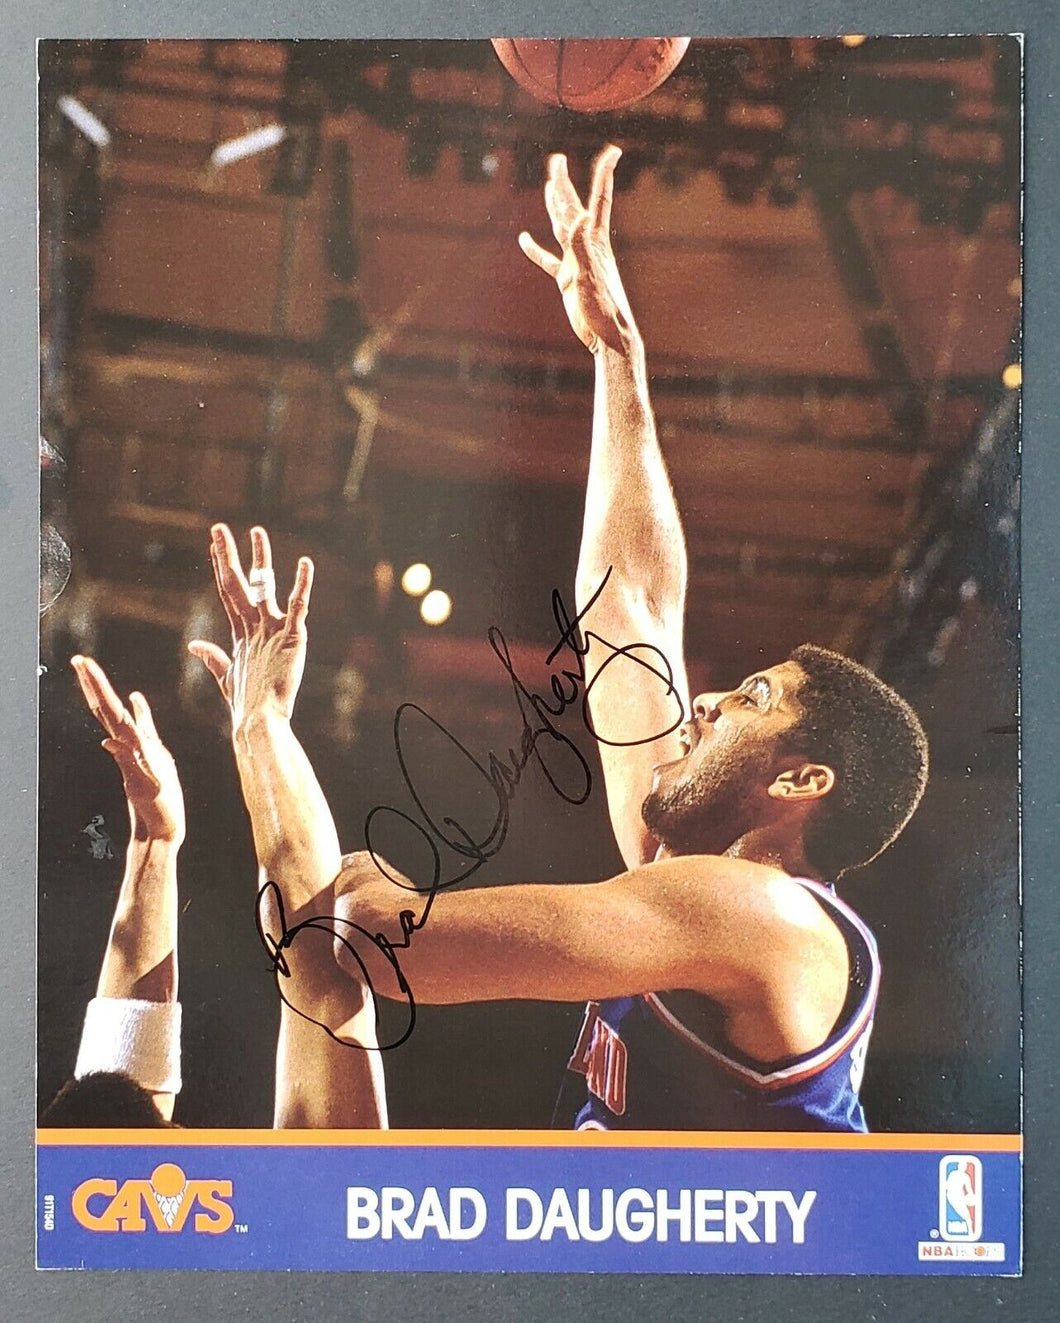 1991 NBA Cleveland Cavaliers Basketball Brad Daugherty Autographed Signed Photo